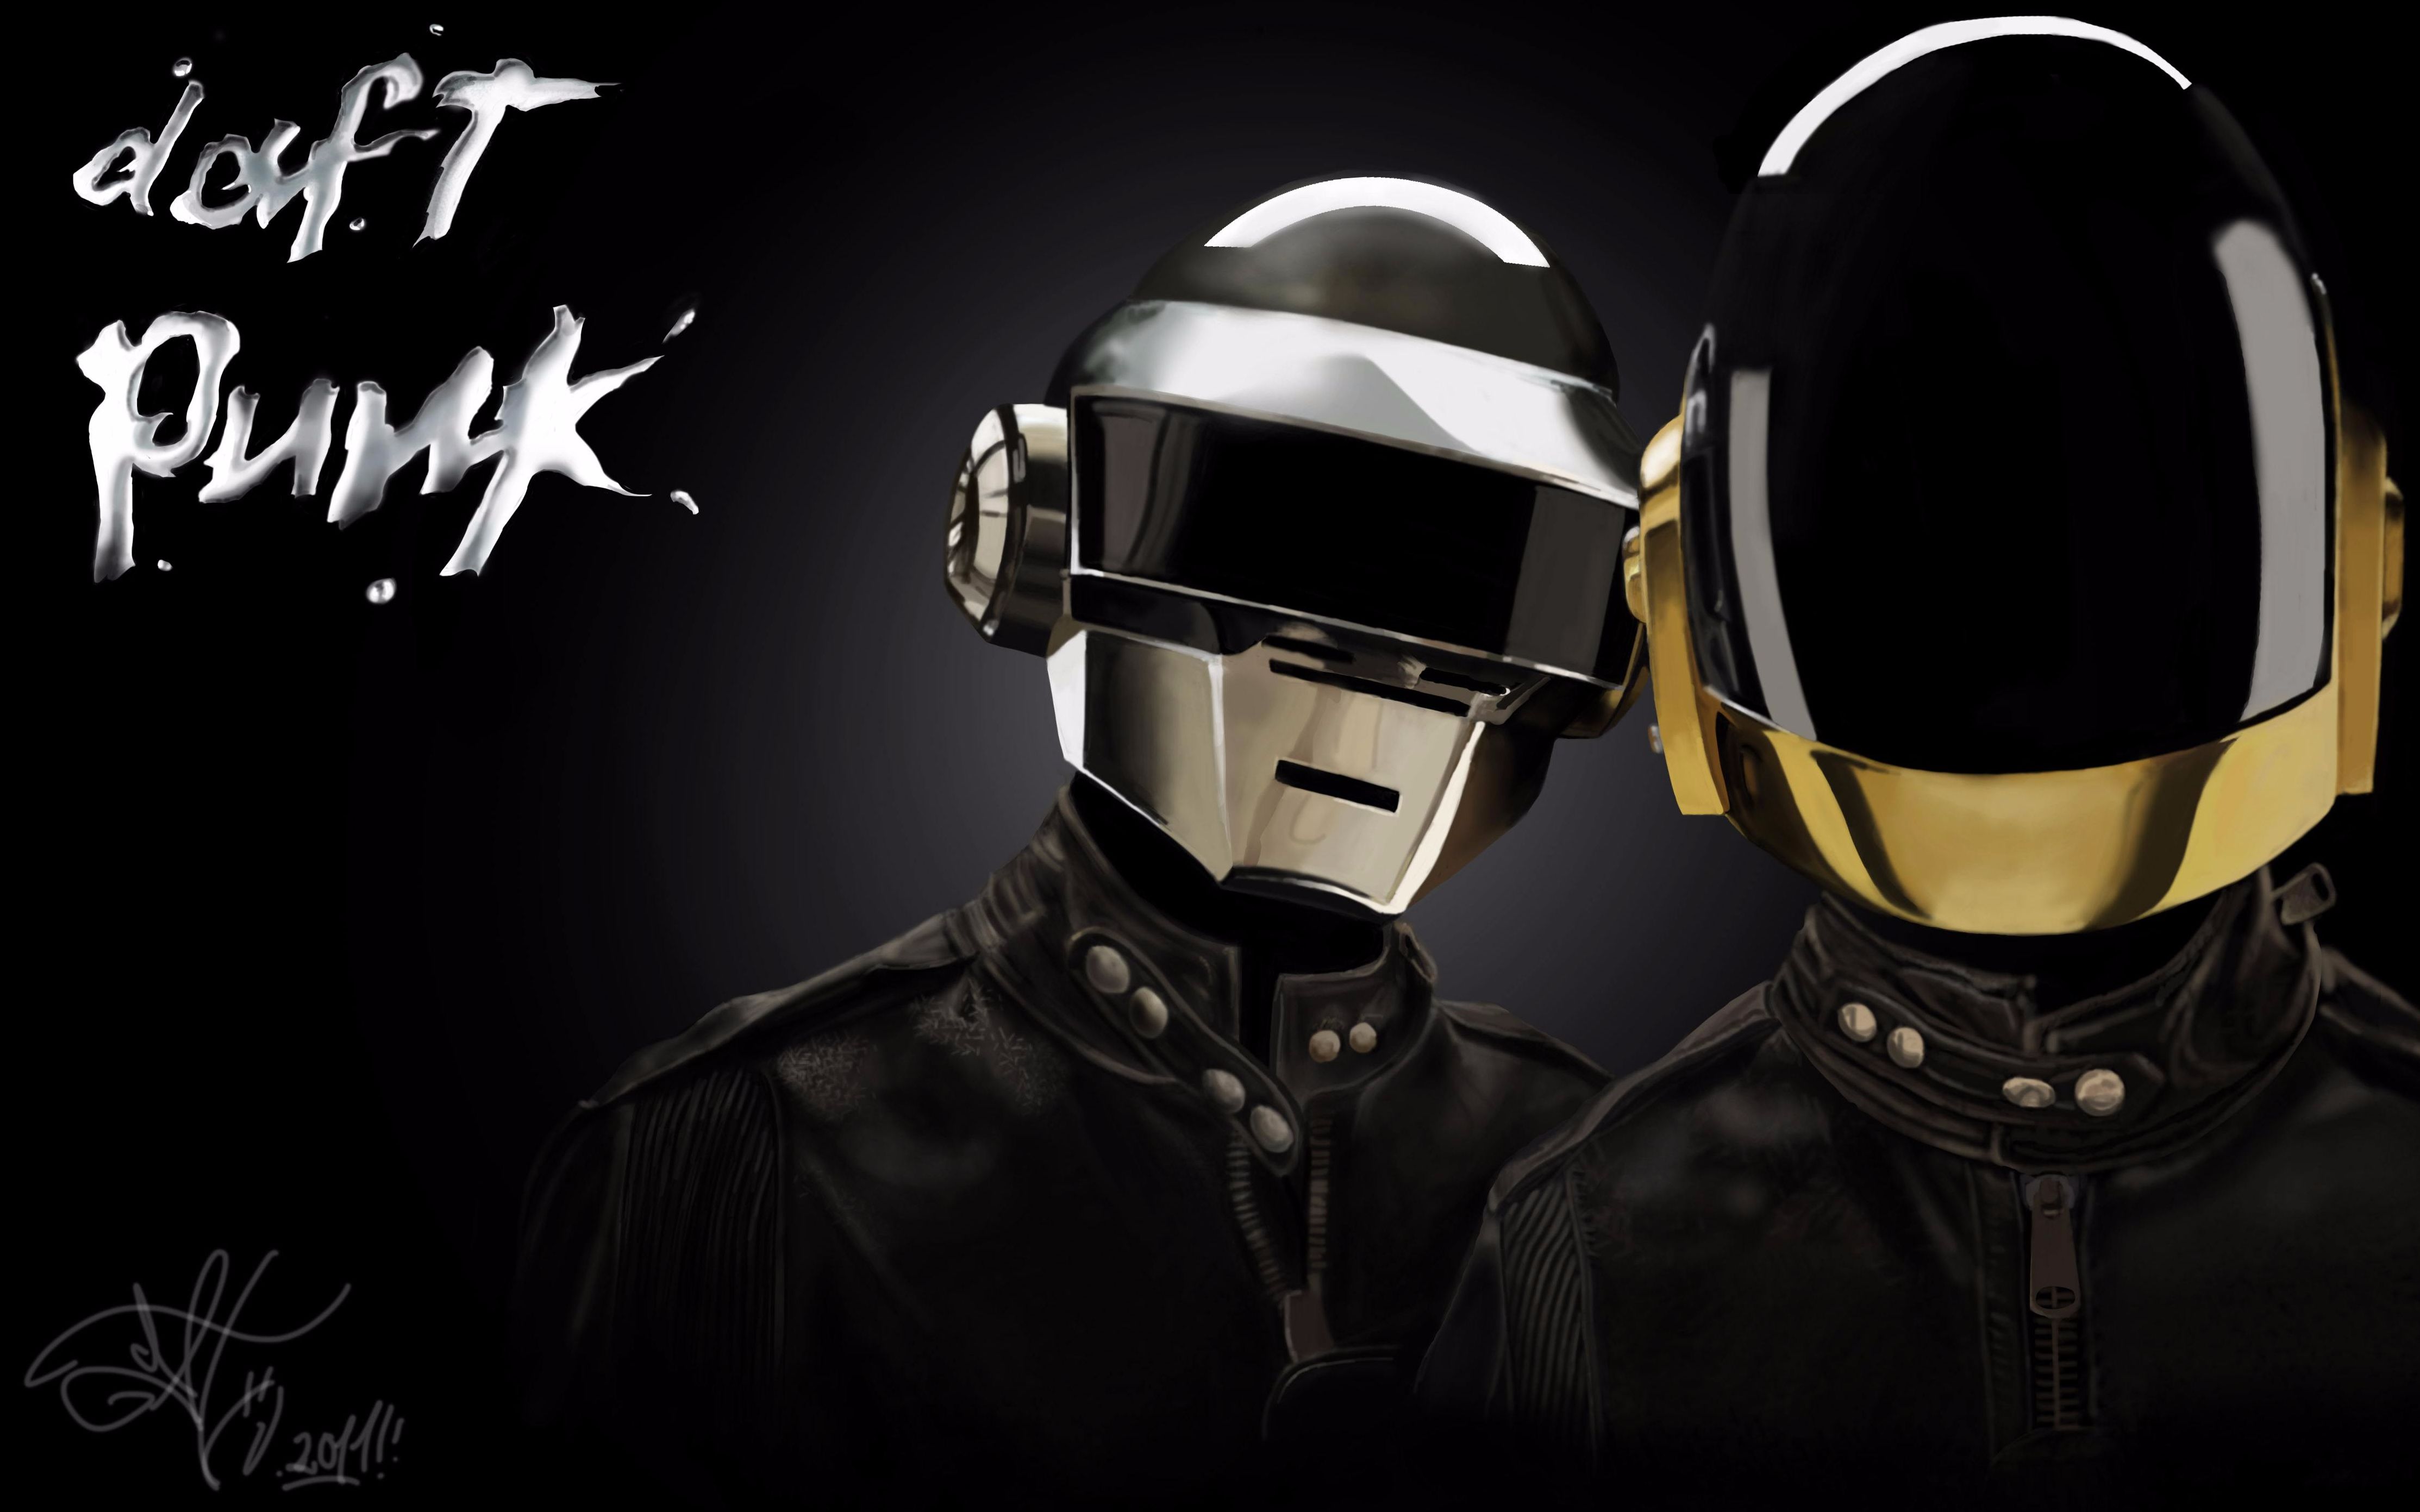 kill bill—daft punk one more time—fromdiscovery(emi france)